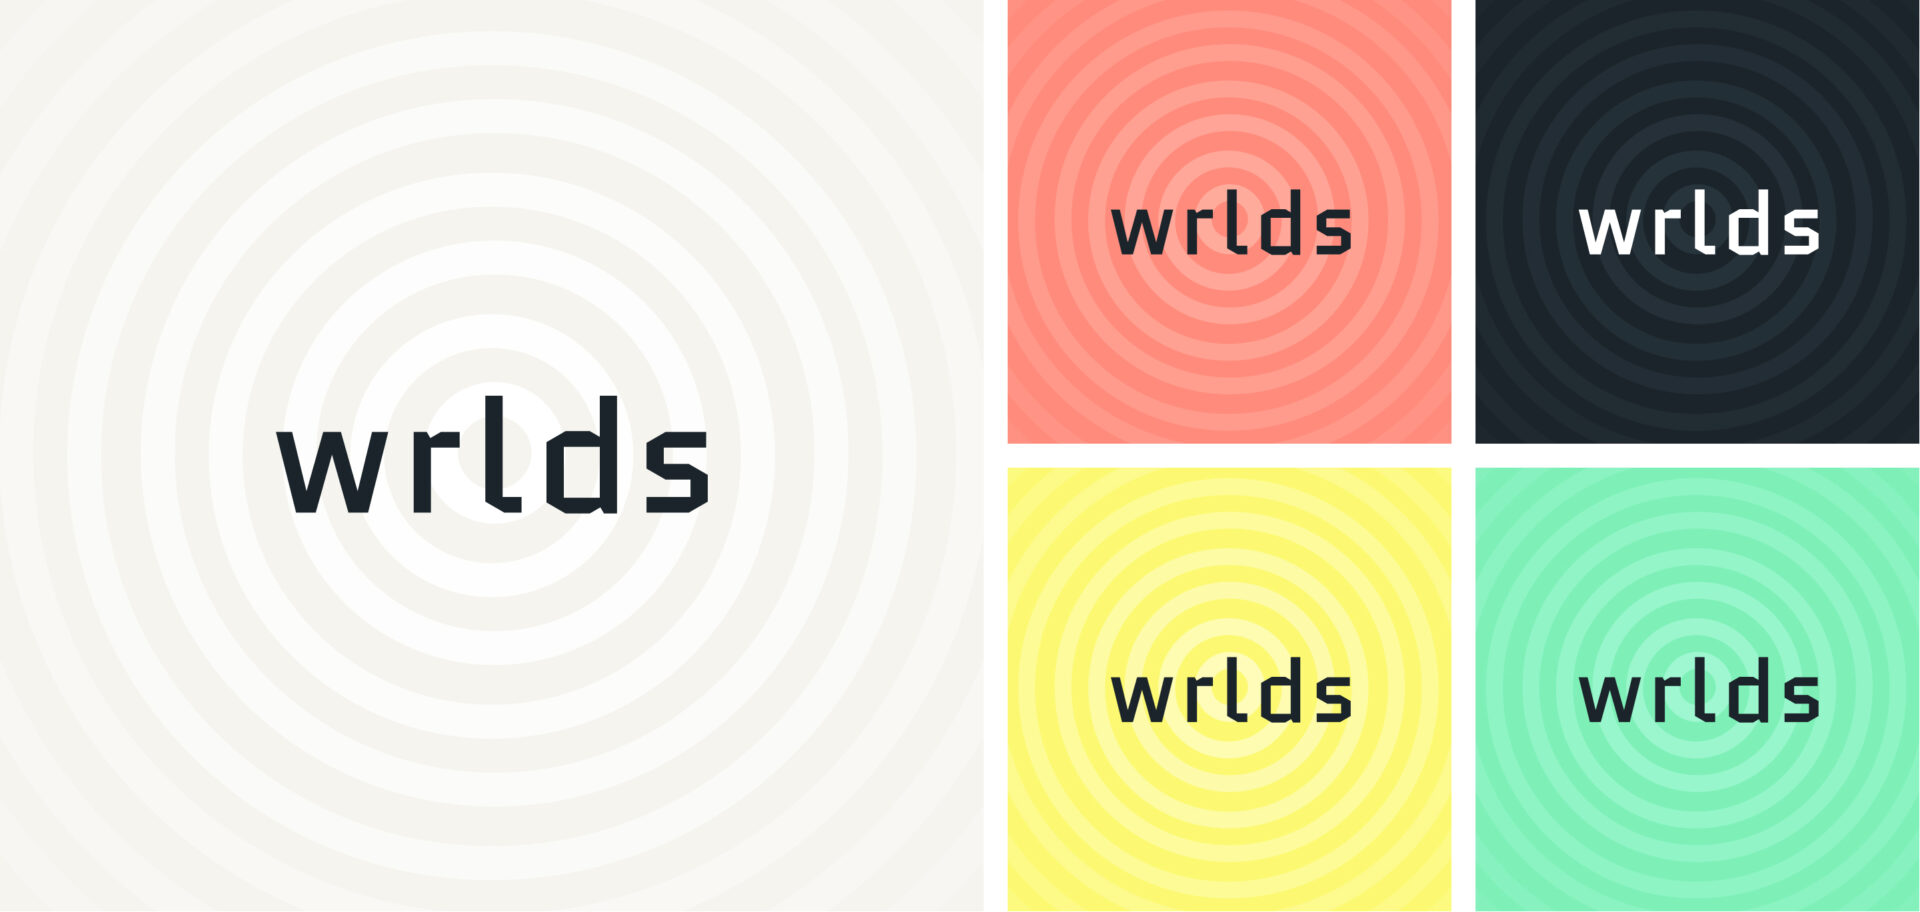 The Wrlds logotype and colors together with the rings creates the identity.